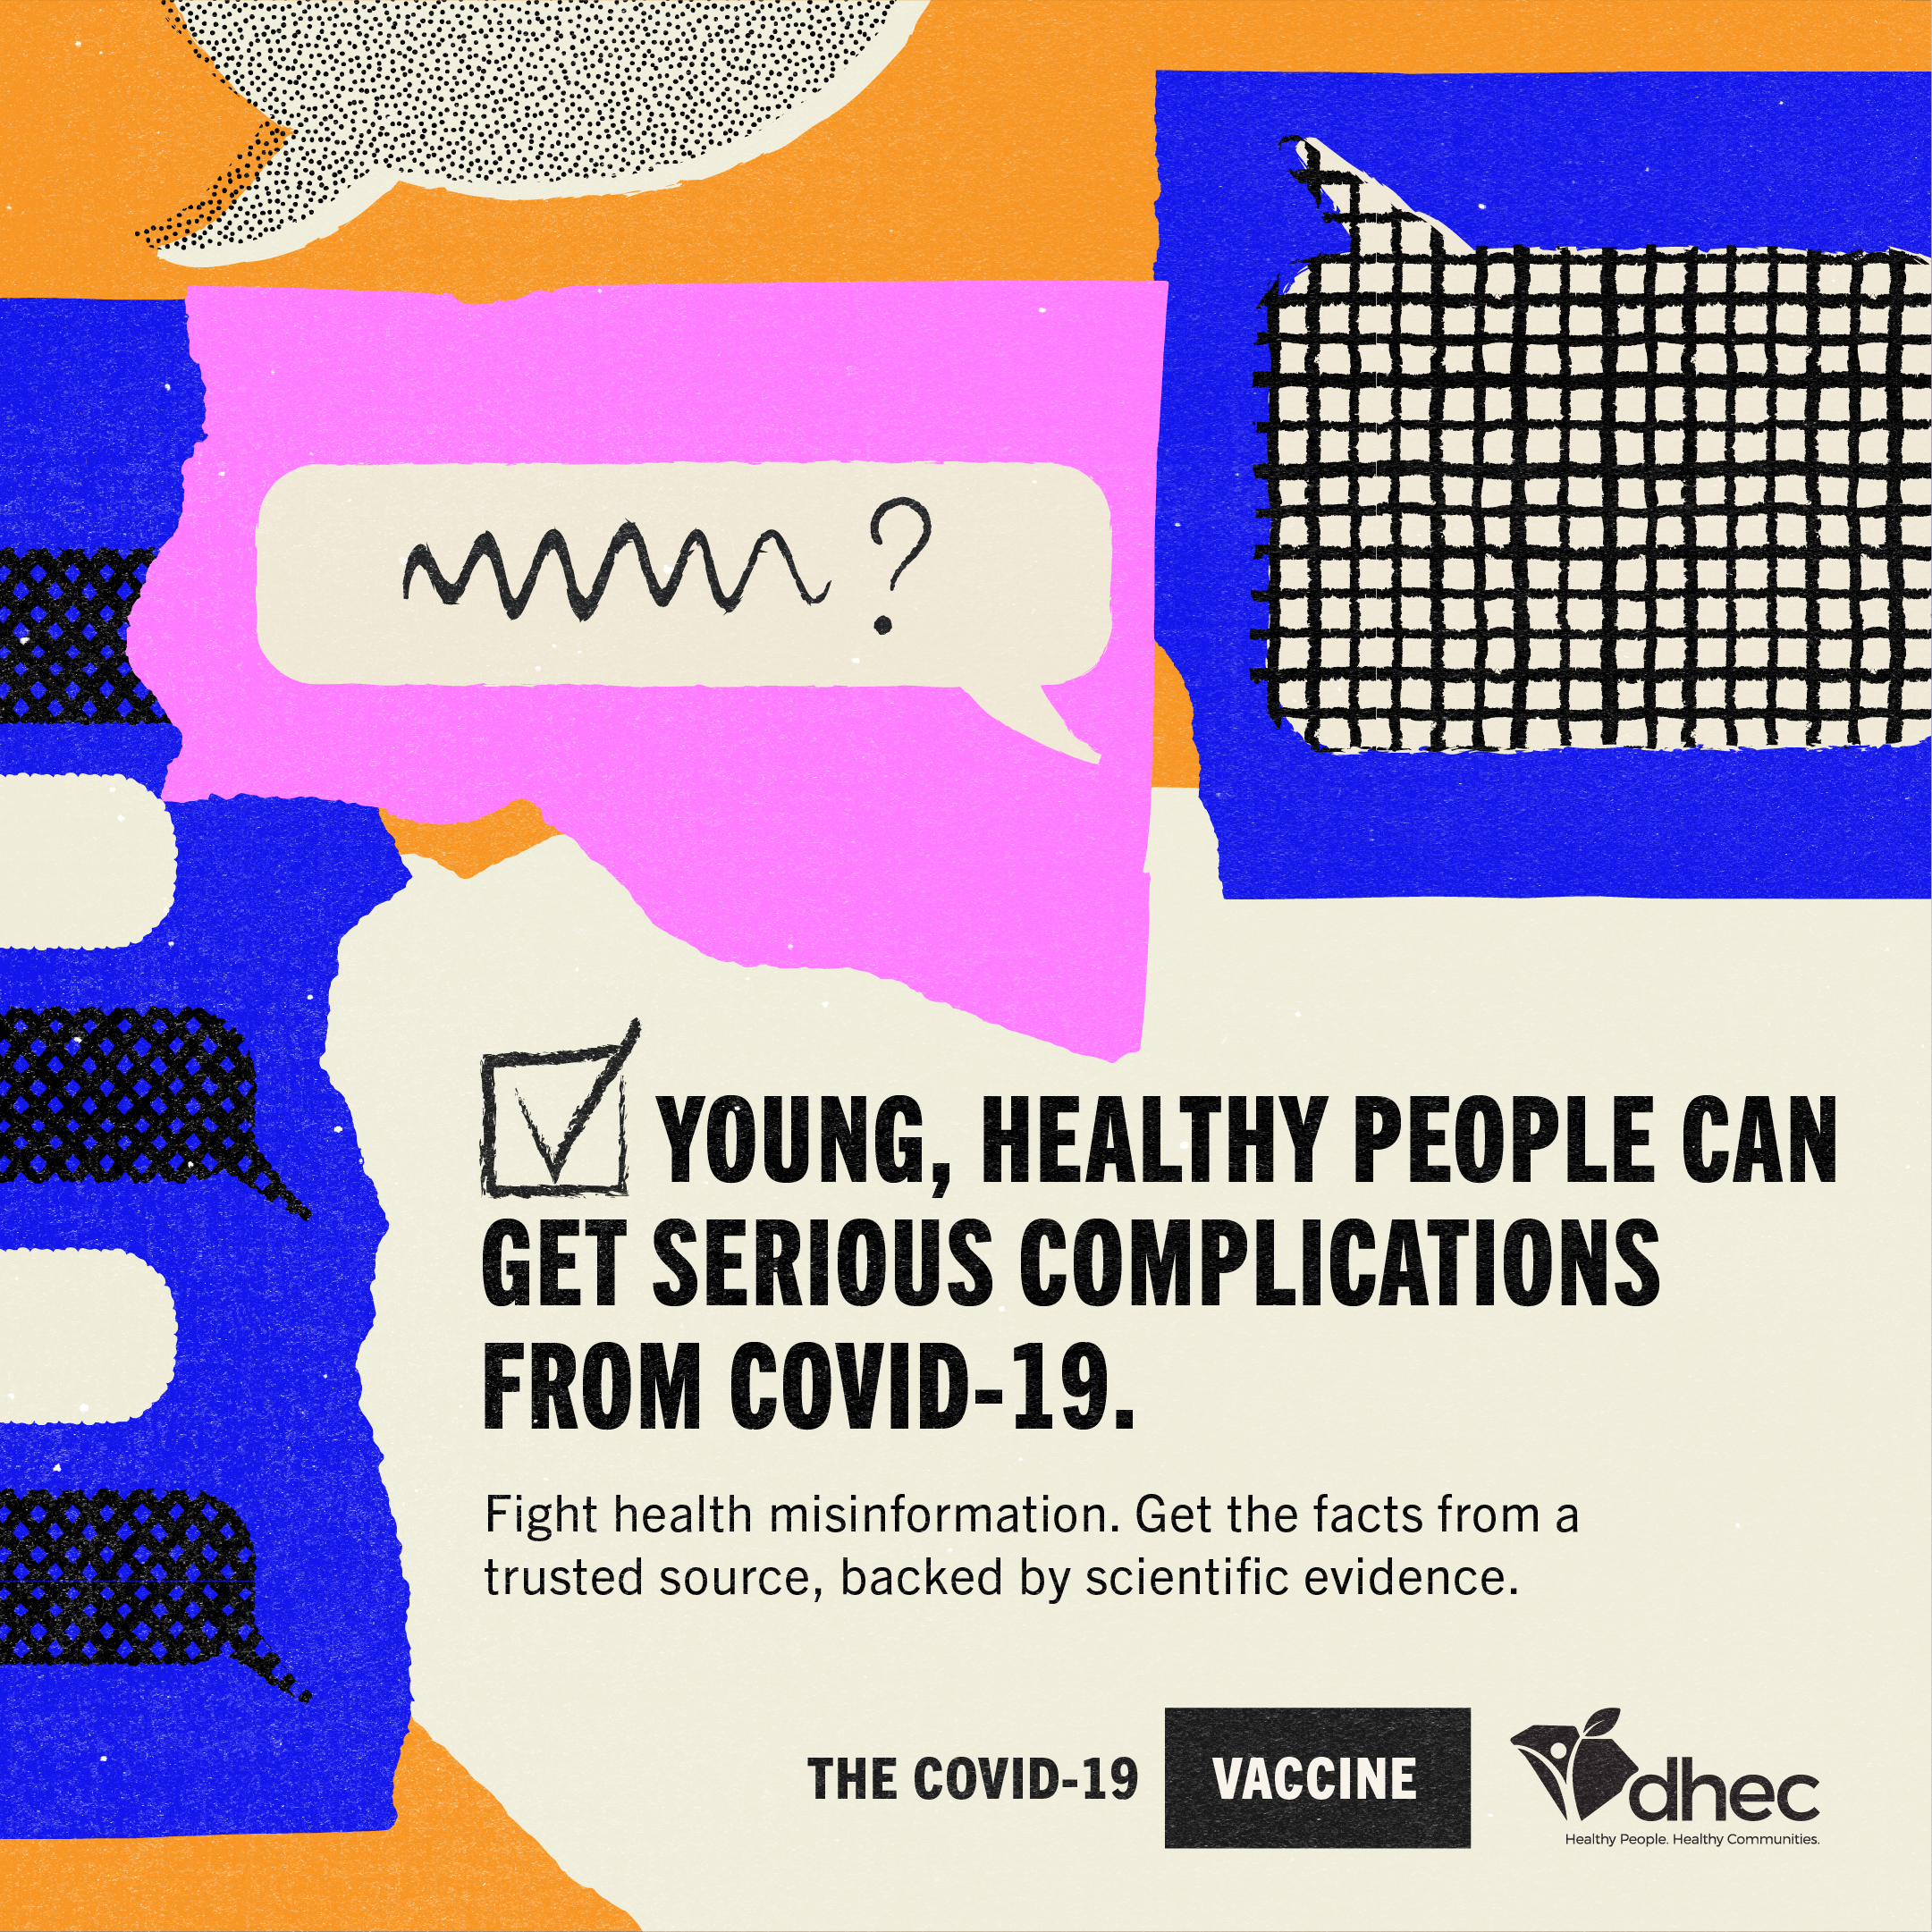 Young, healthy people can get serious complications from COVID-19.